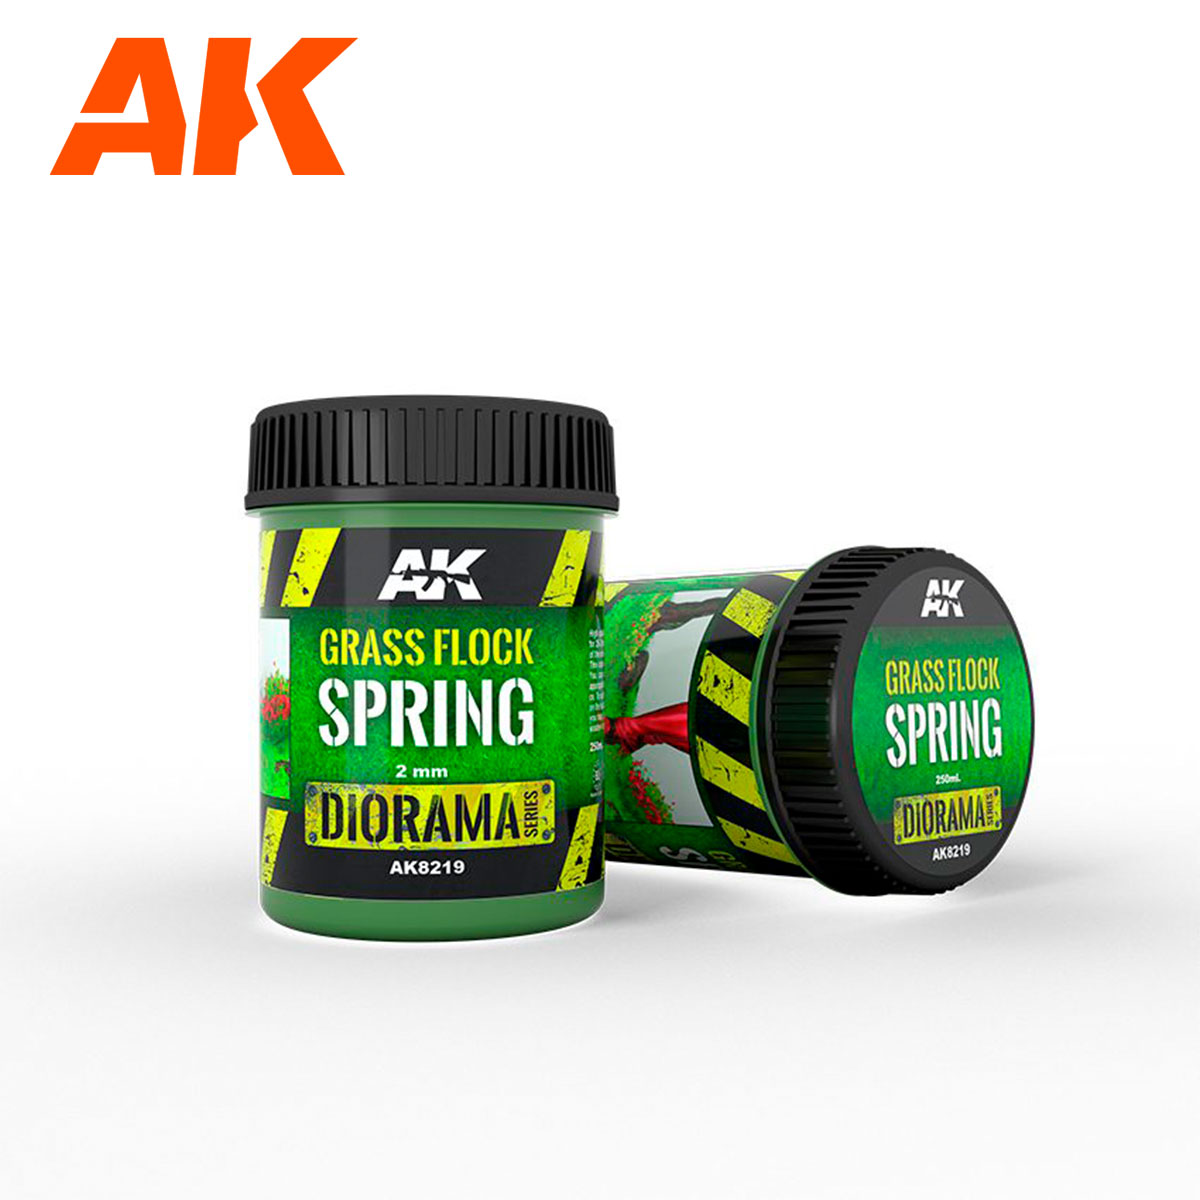 Buy GRASS FLOCK 2MM SPRING online for5,95€ | AK-Interactive